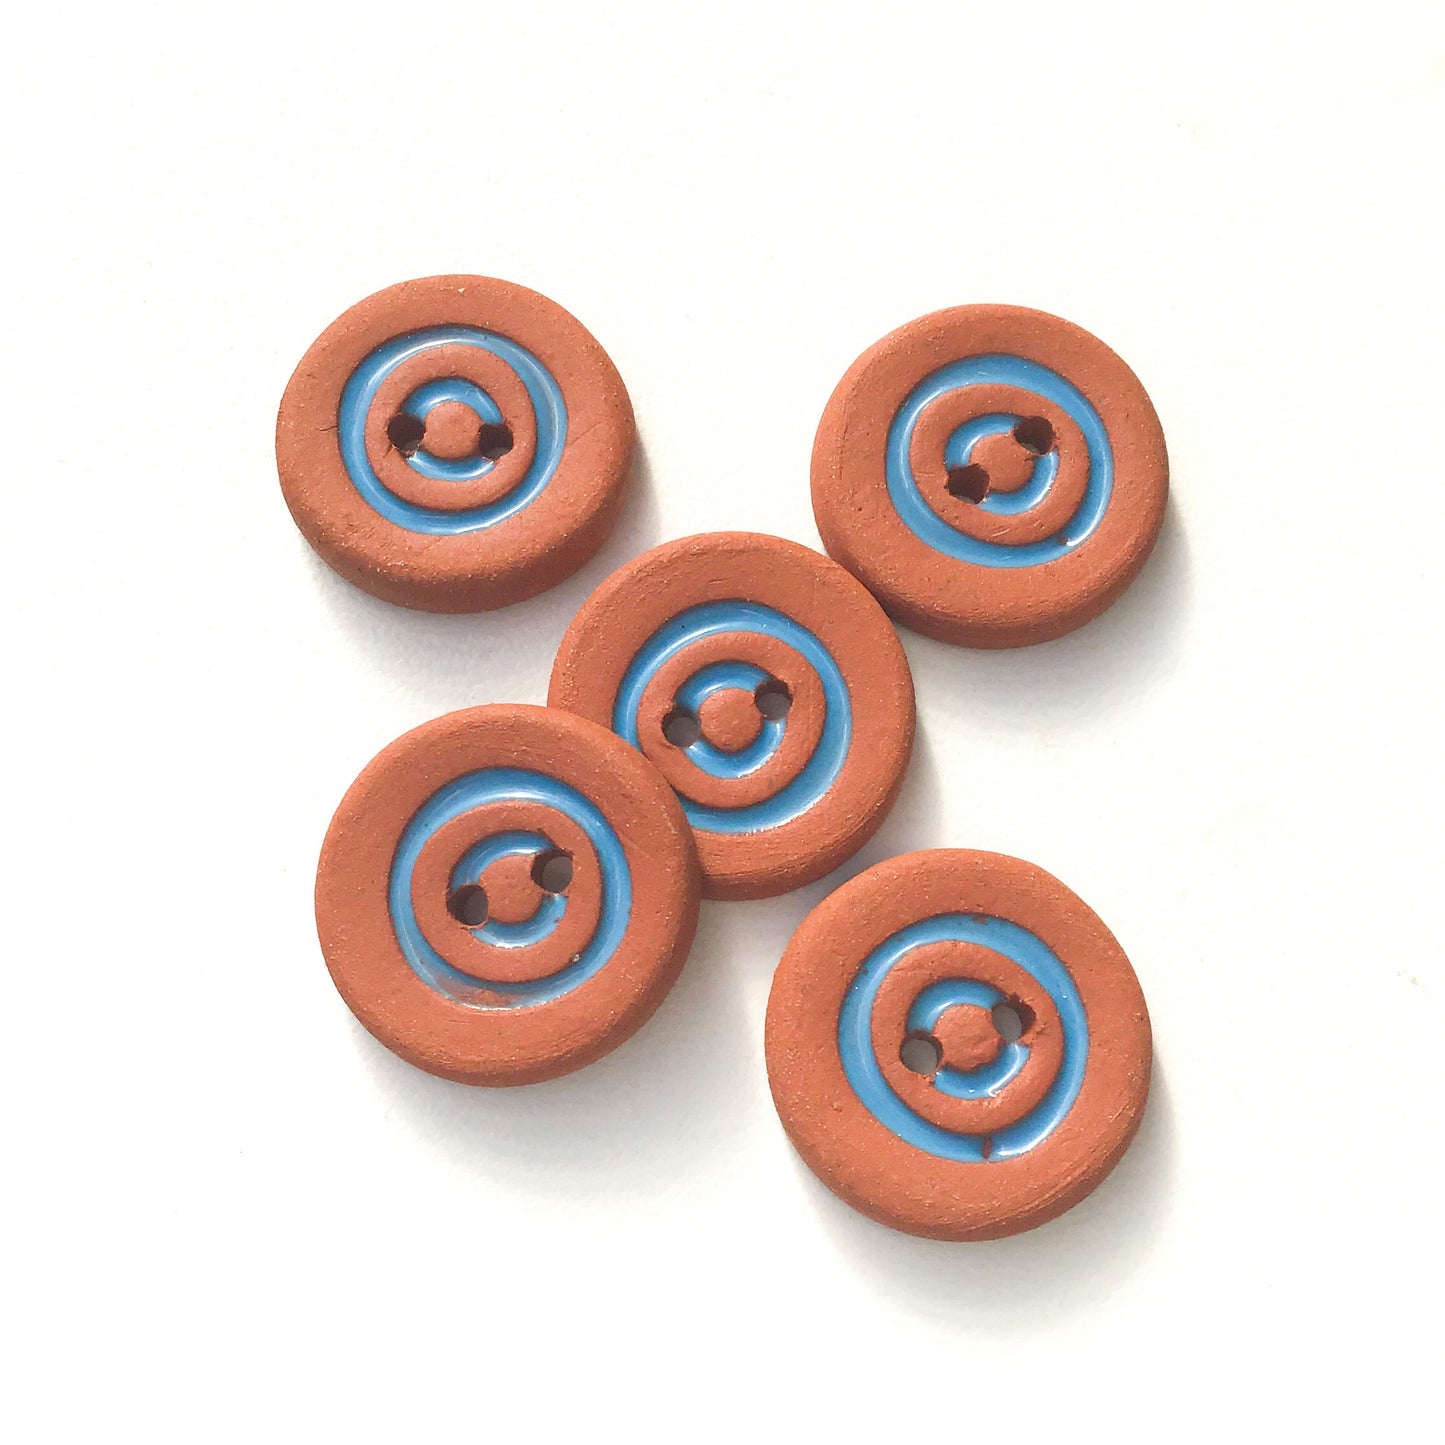 Cerulean Blue Concentric Circle Ceramic Buttons on Terracotta Clay - 3/4" - 5 Pack